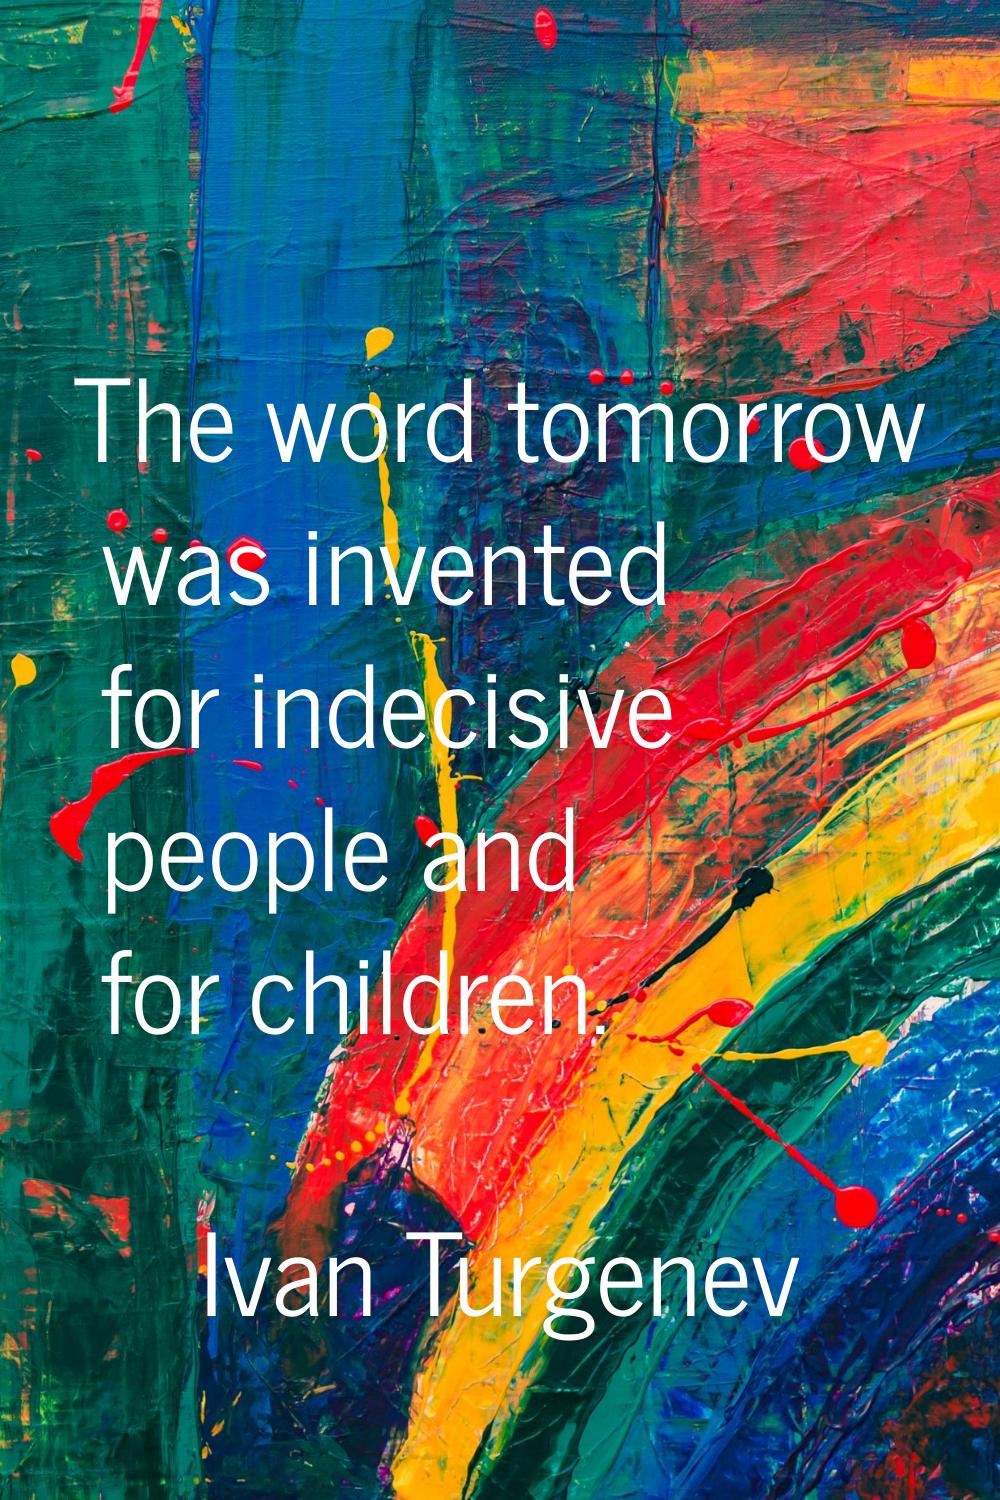 The word tomorrow was invented for indecisive people and for children.